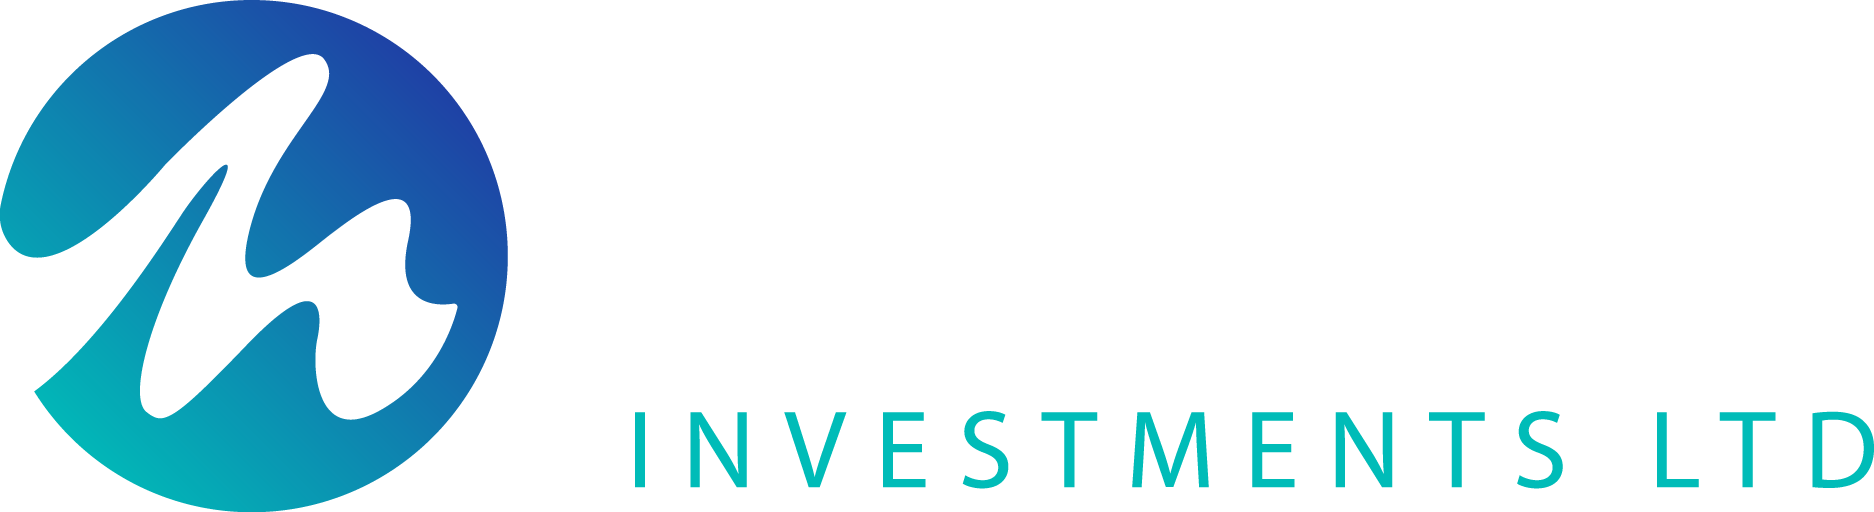 MIRA INVESTMENTS LIMITED